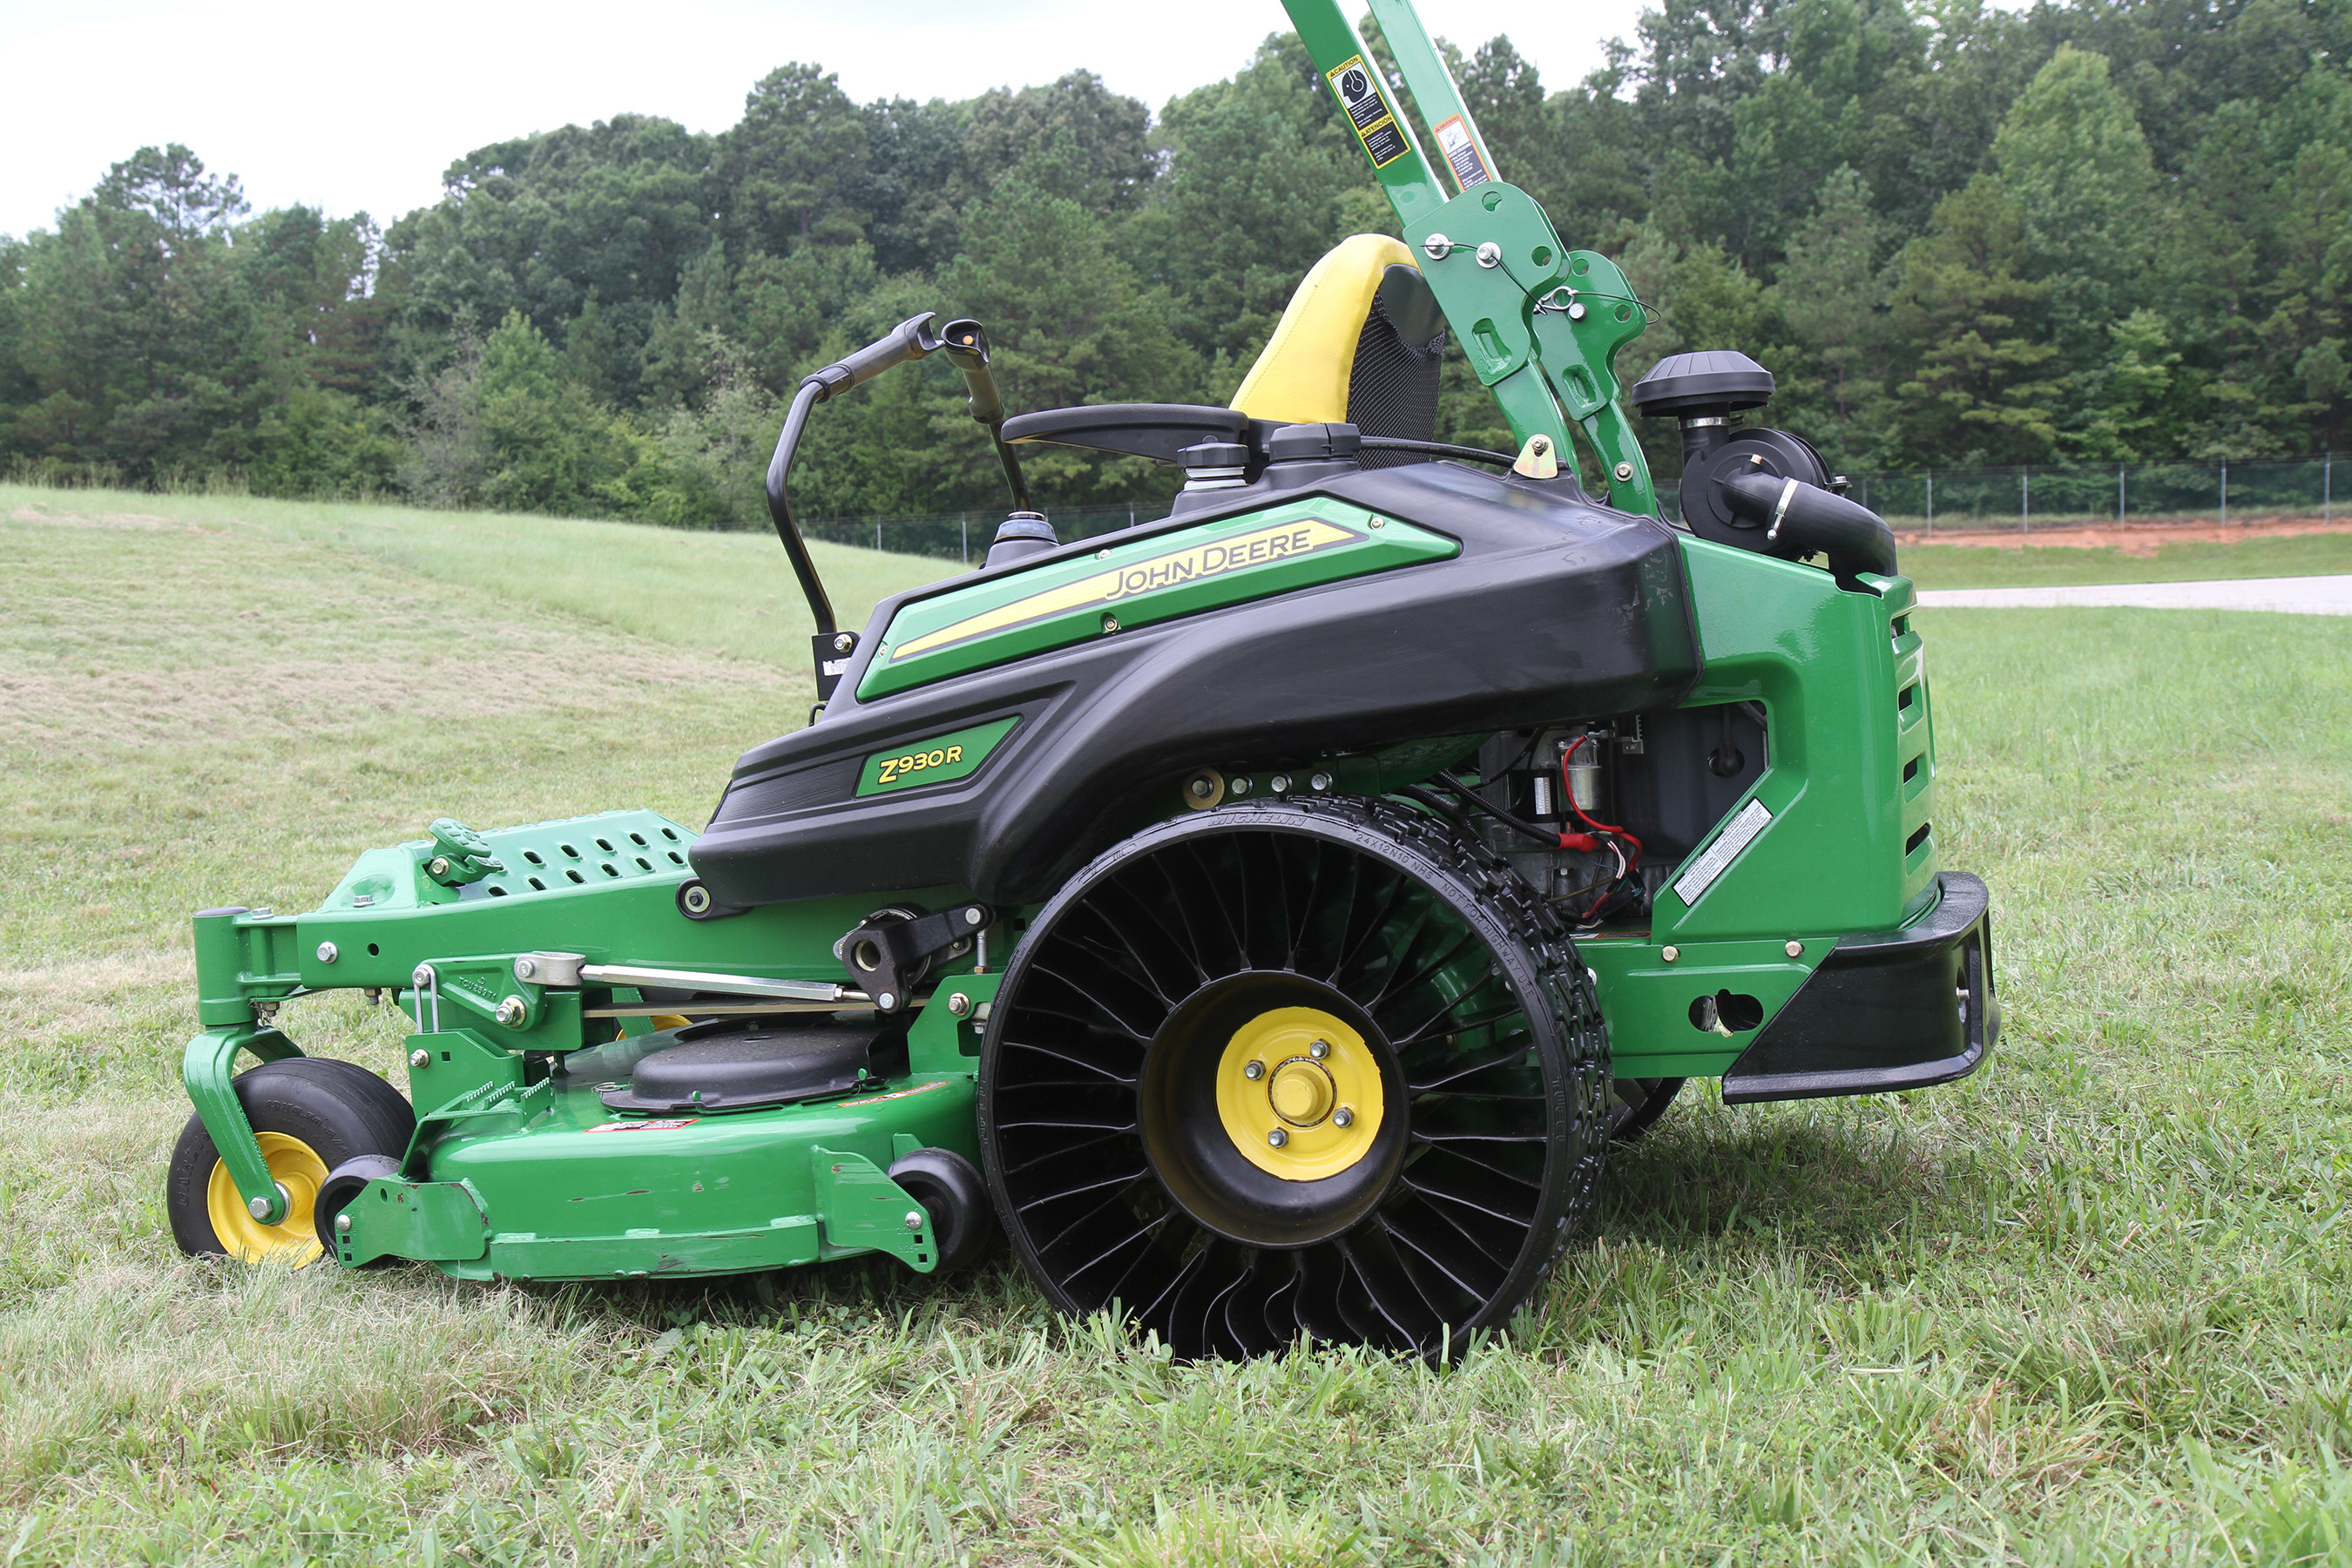 MICHELIN TO PROVIDE AIRLESS RADIAL TIRE FOR JOHN DEERE ...